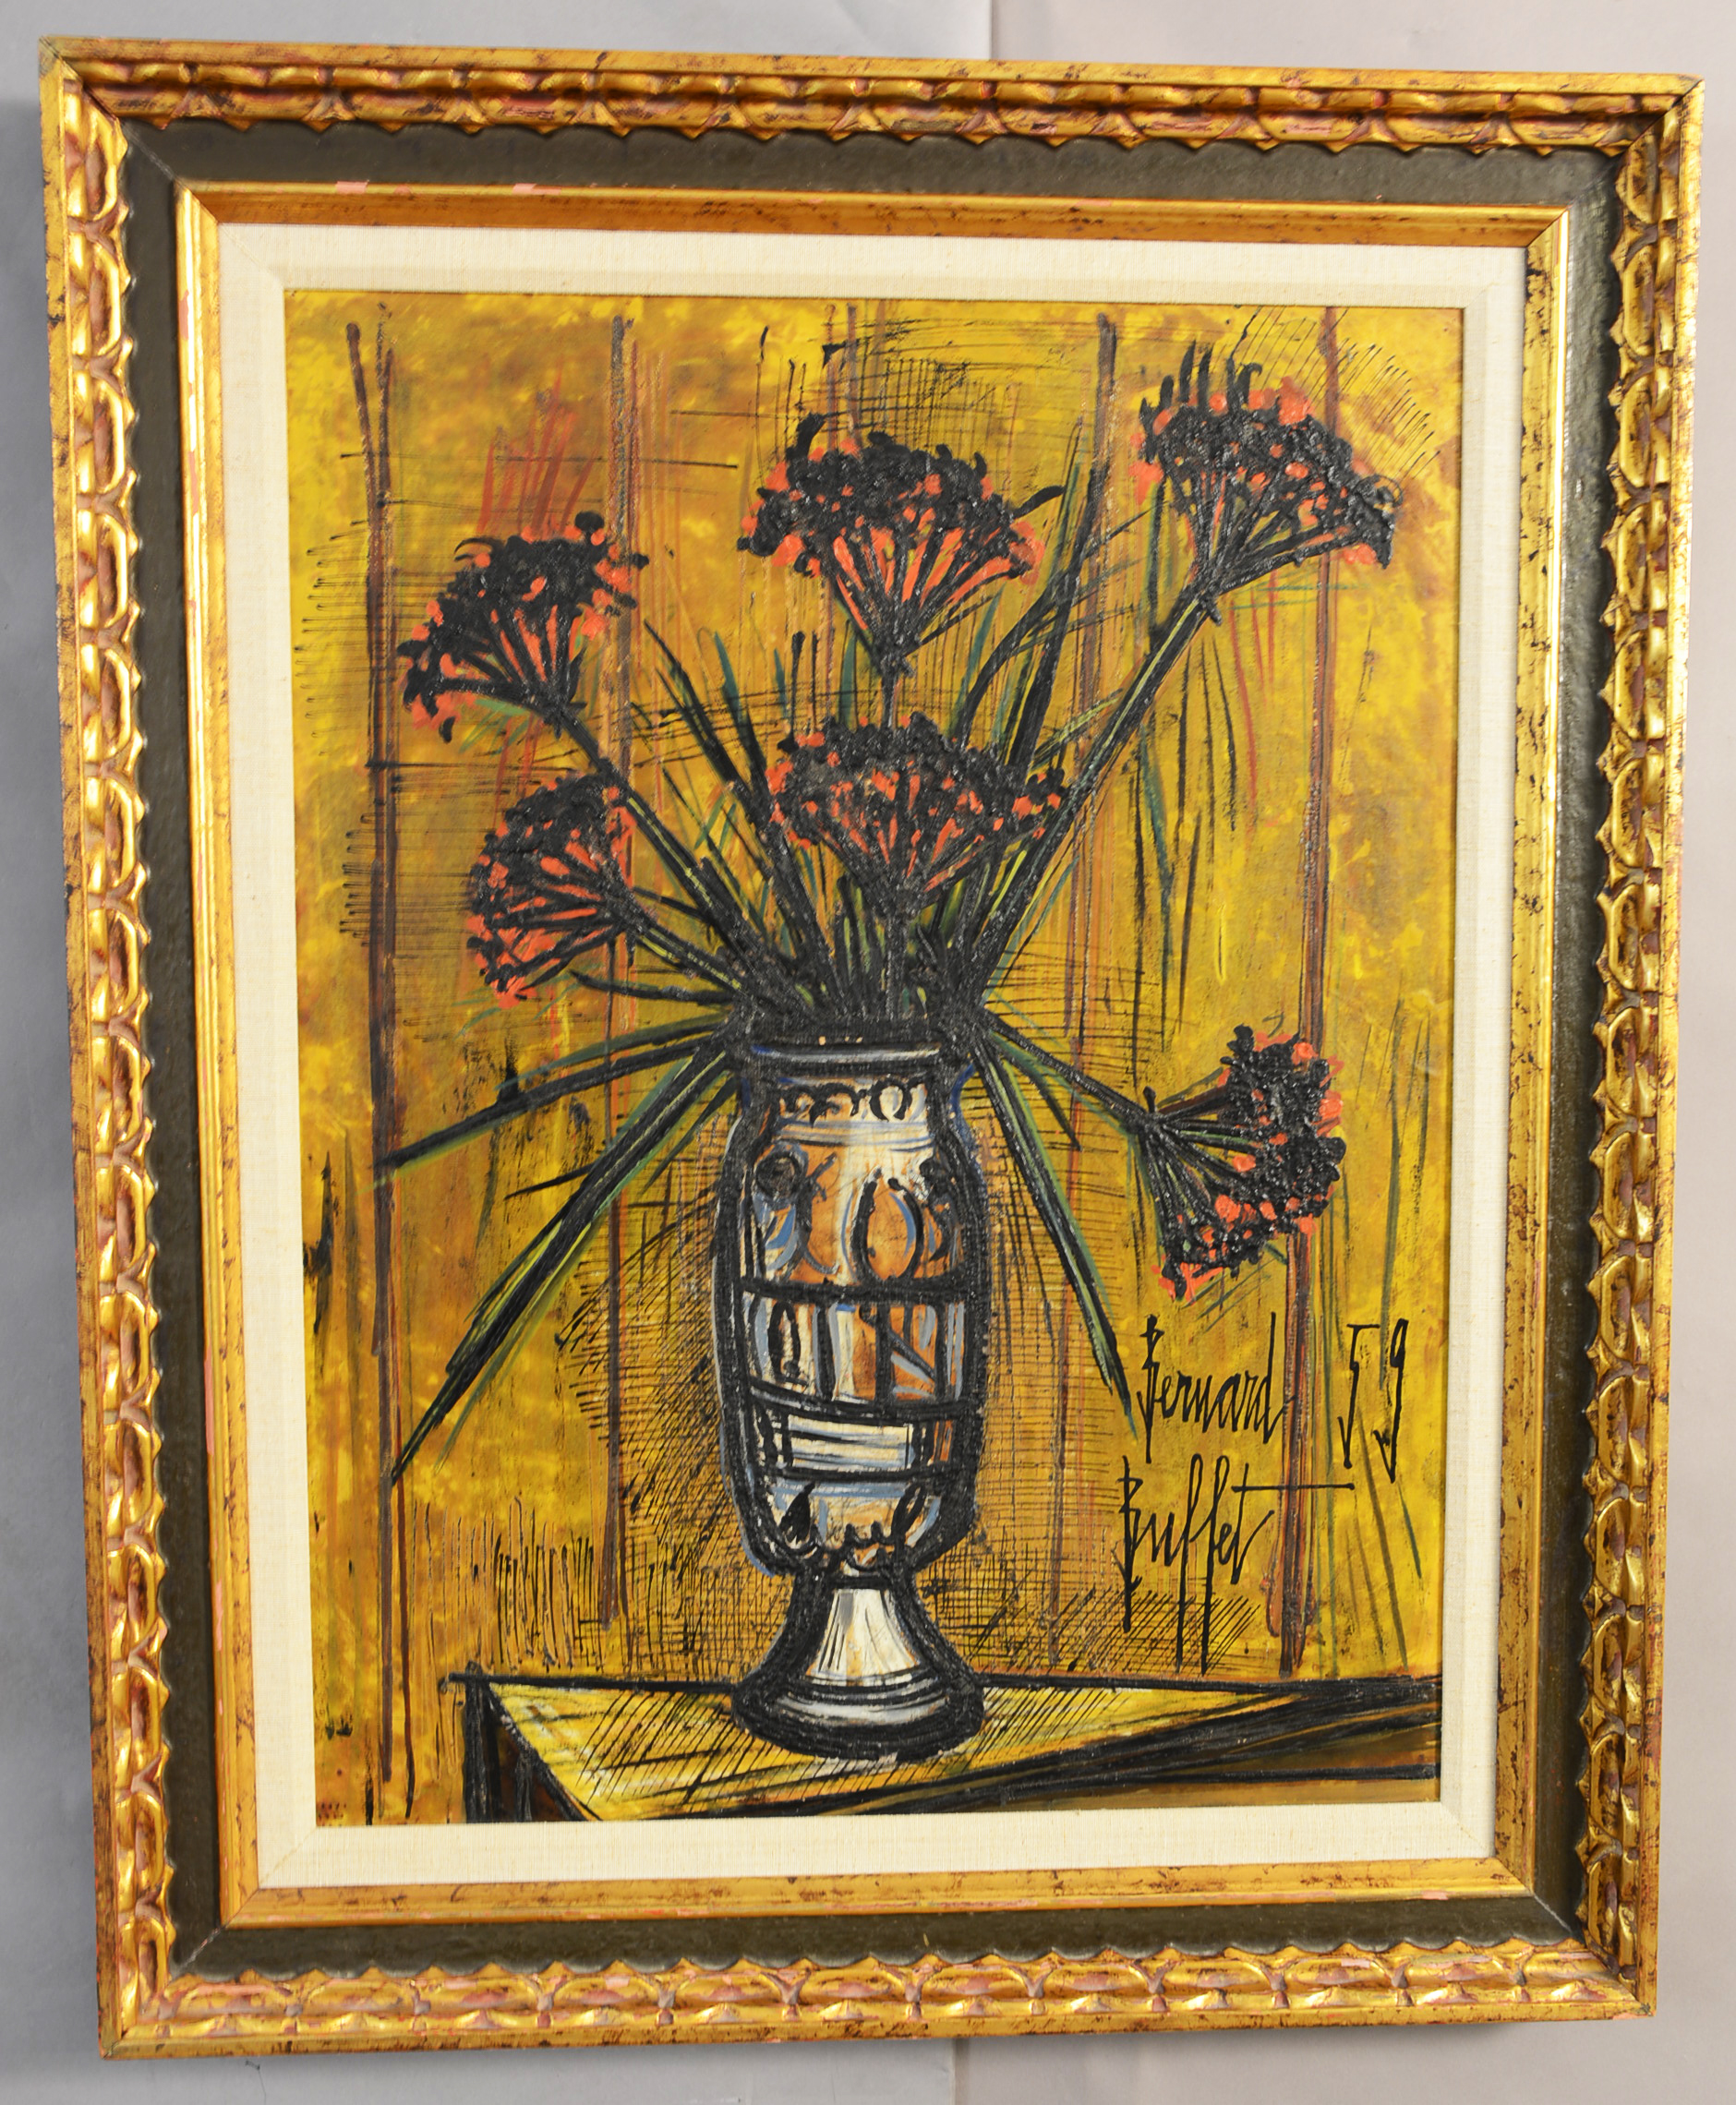 Still life oil on board by signer Bernard Buffet, '59, originally purchased from International Galleries in Chicago, 20in x 26in. Estimate: $5,000-$12,000. Bruhns Auction Gallery image